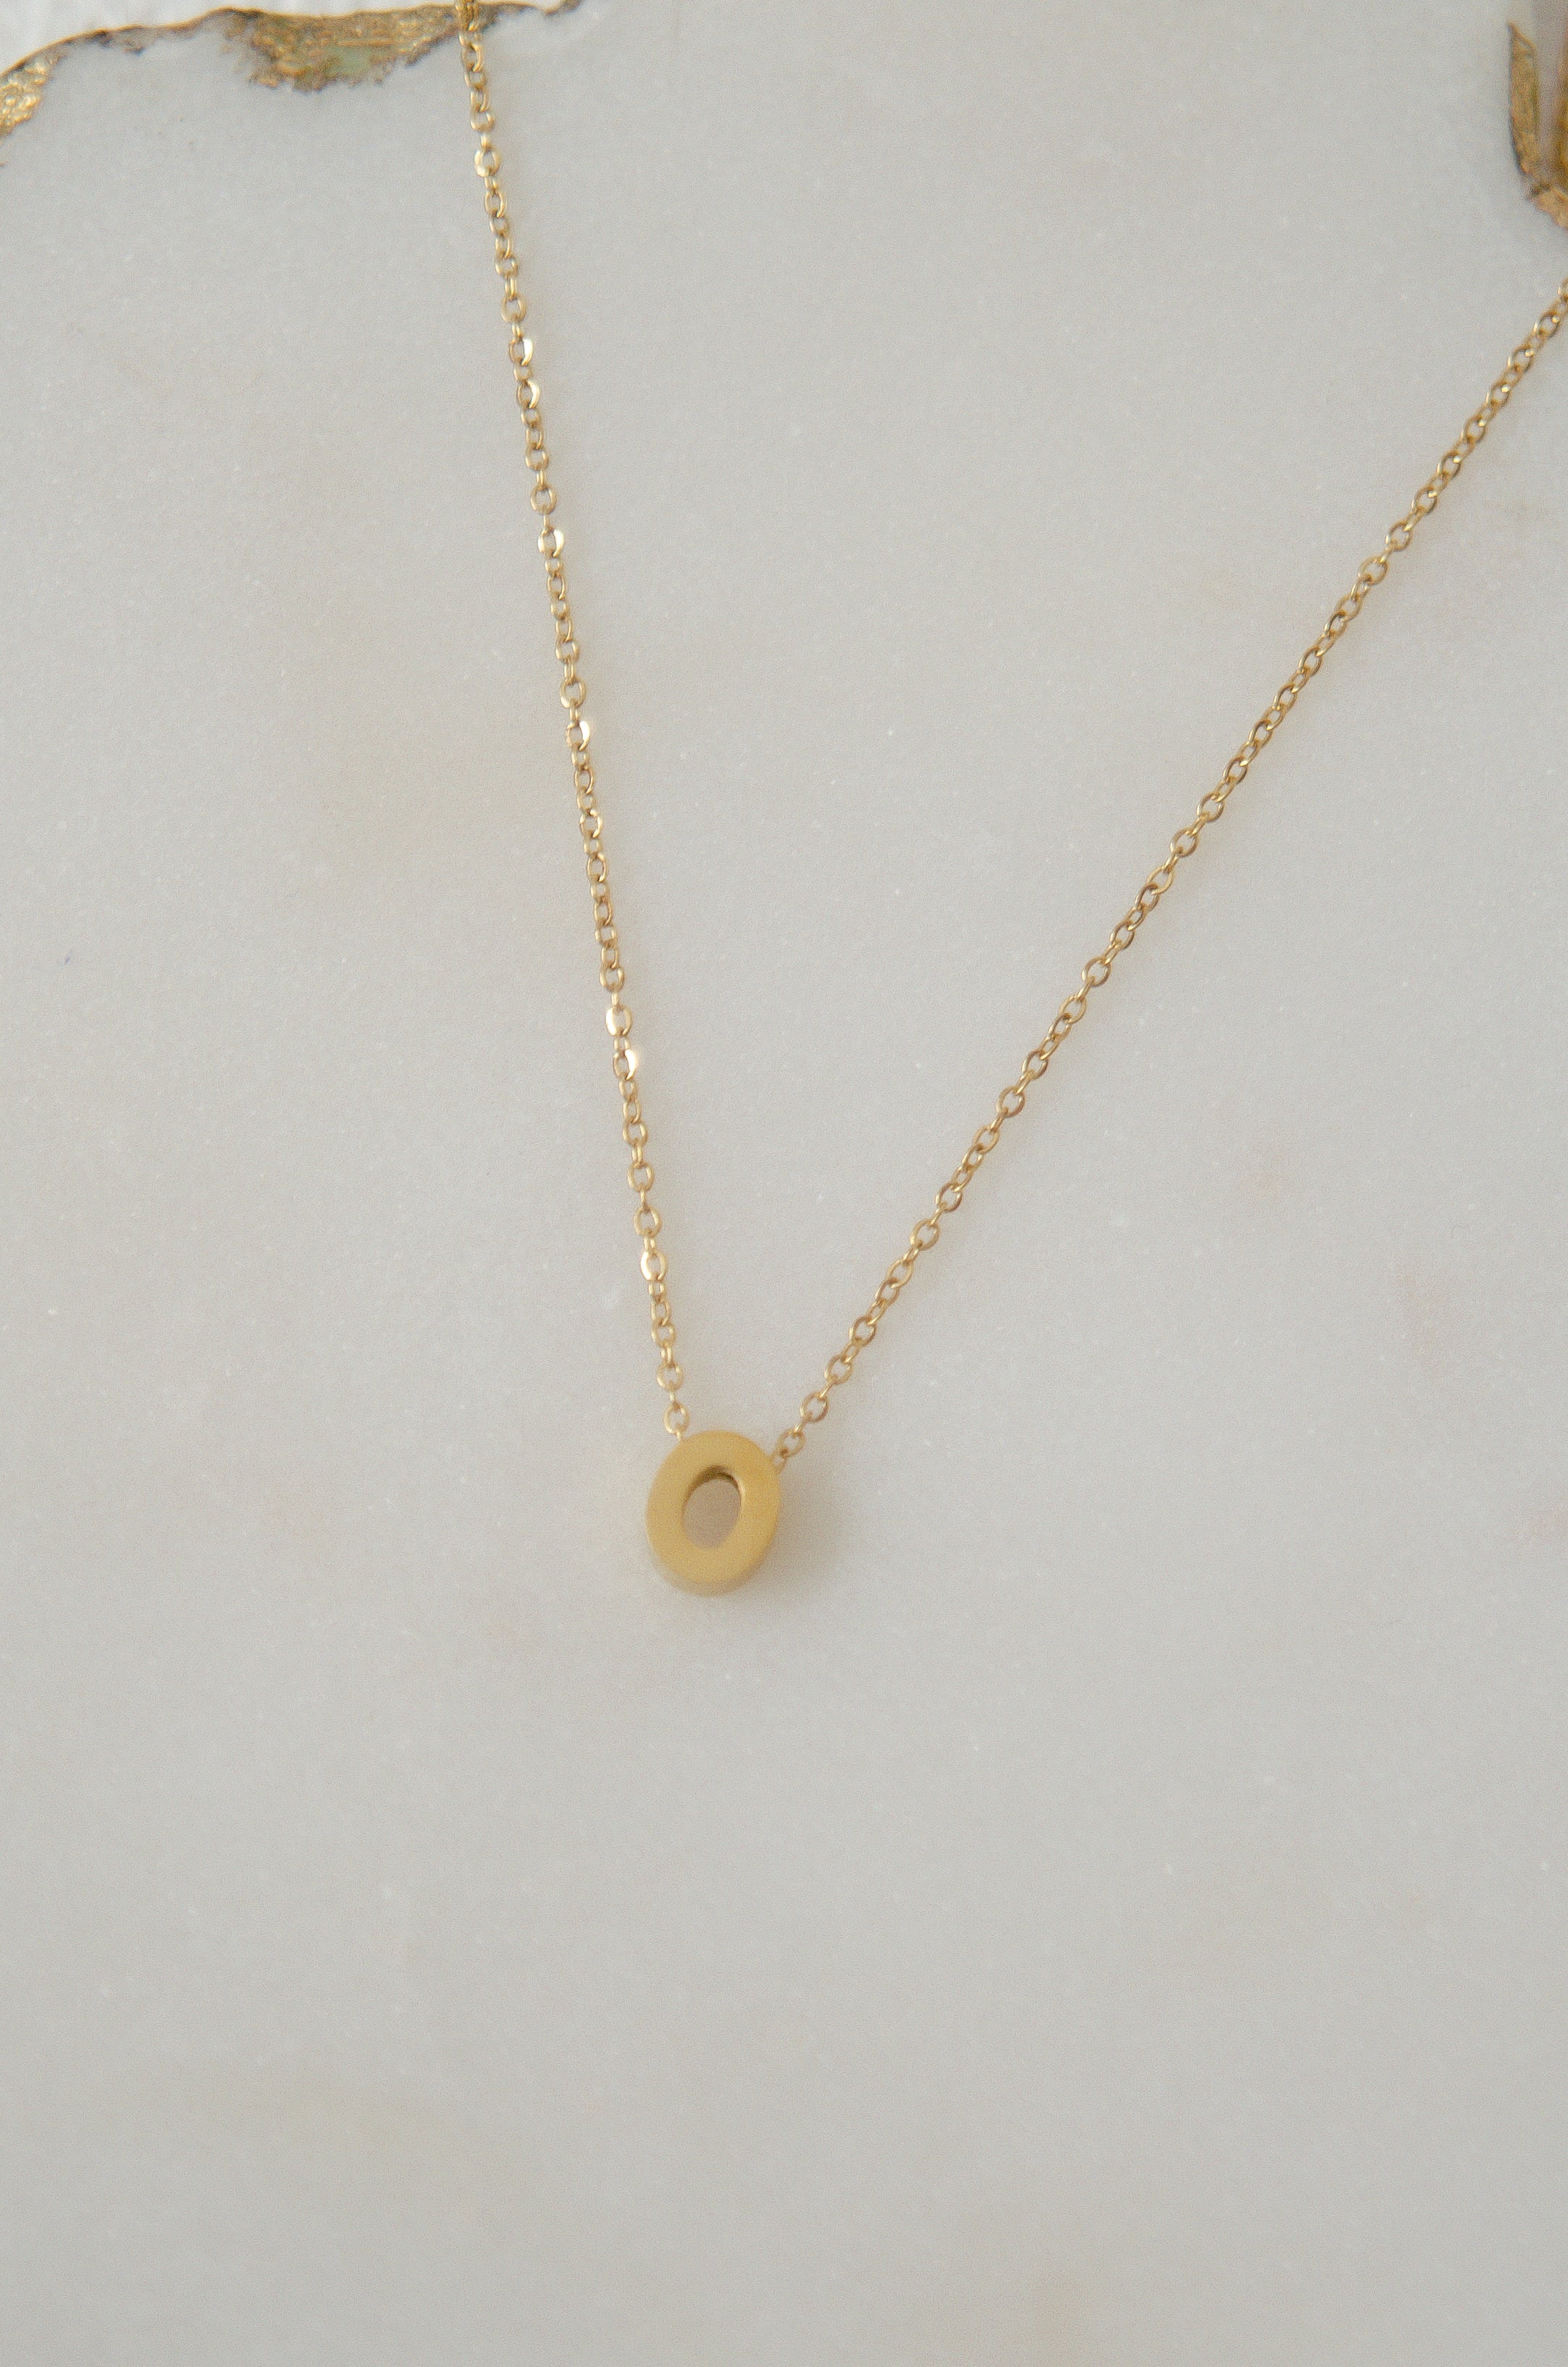 LETTERS NECKLACE // O